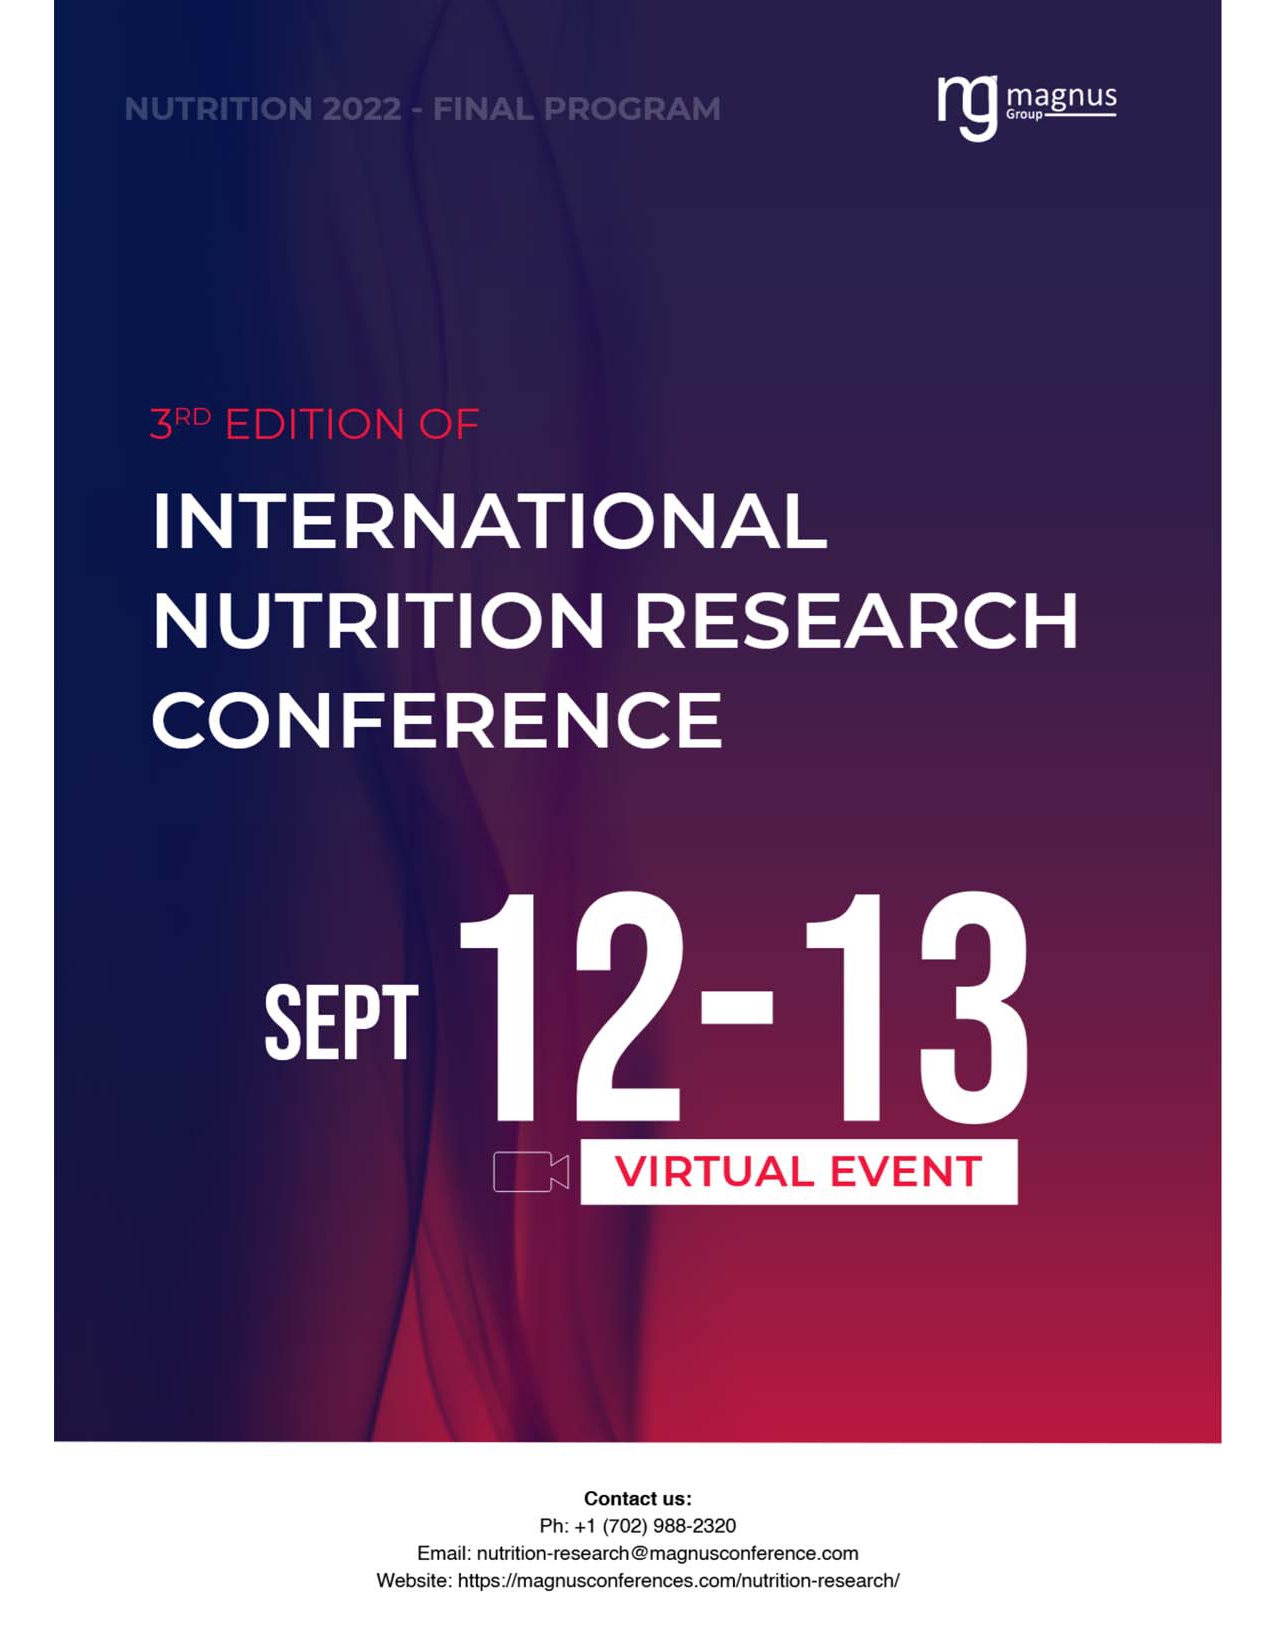 3rd Edition of International Conference on Nutrition Research Conference | Online Event Program